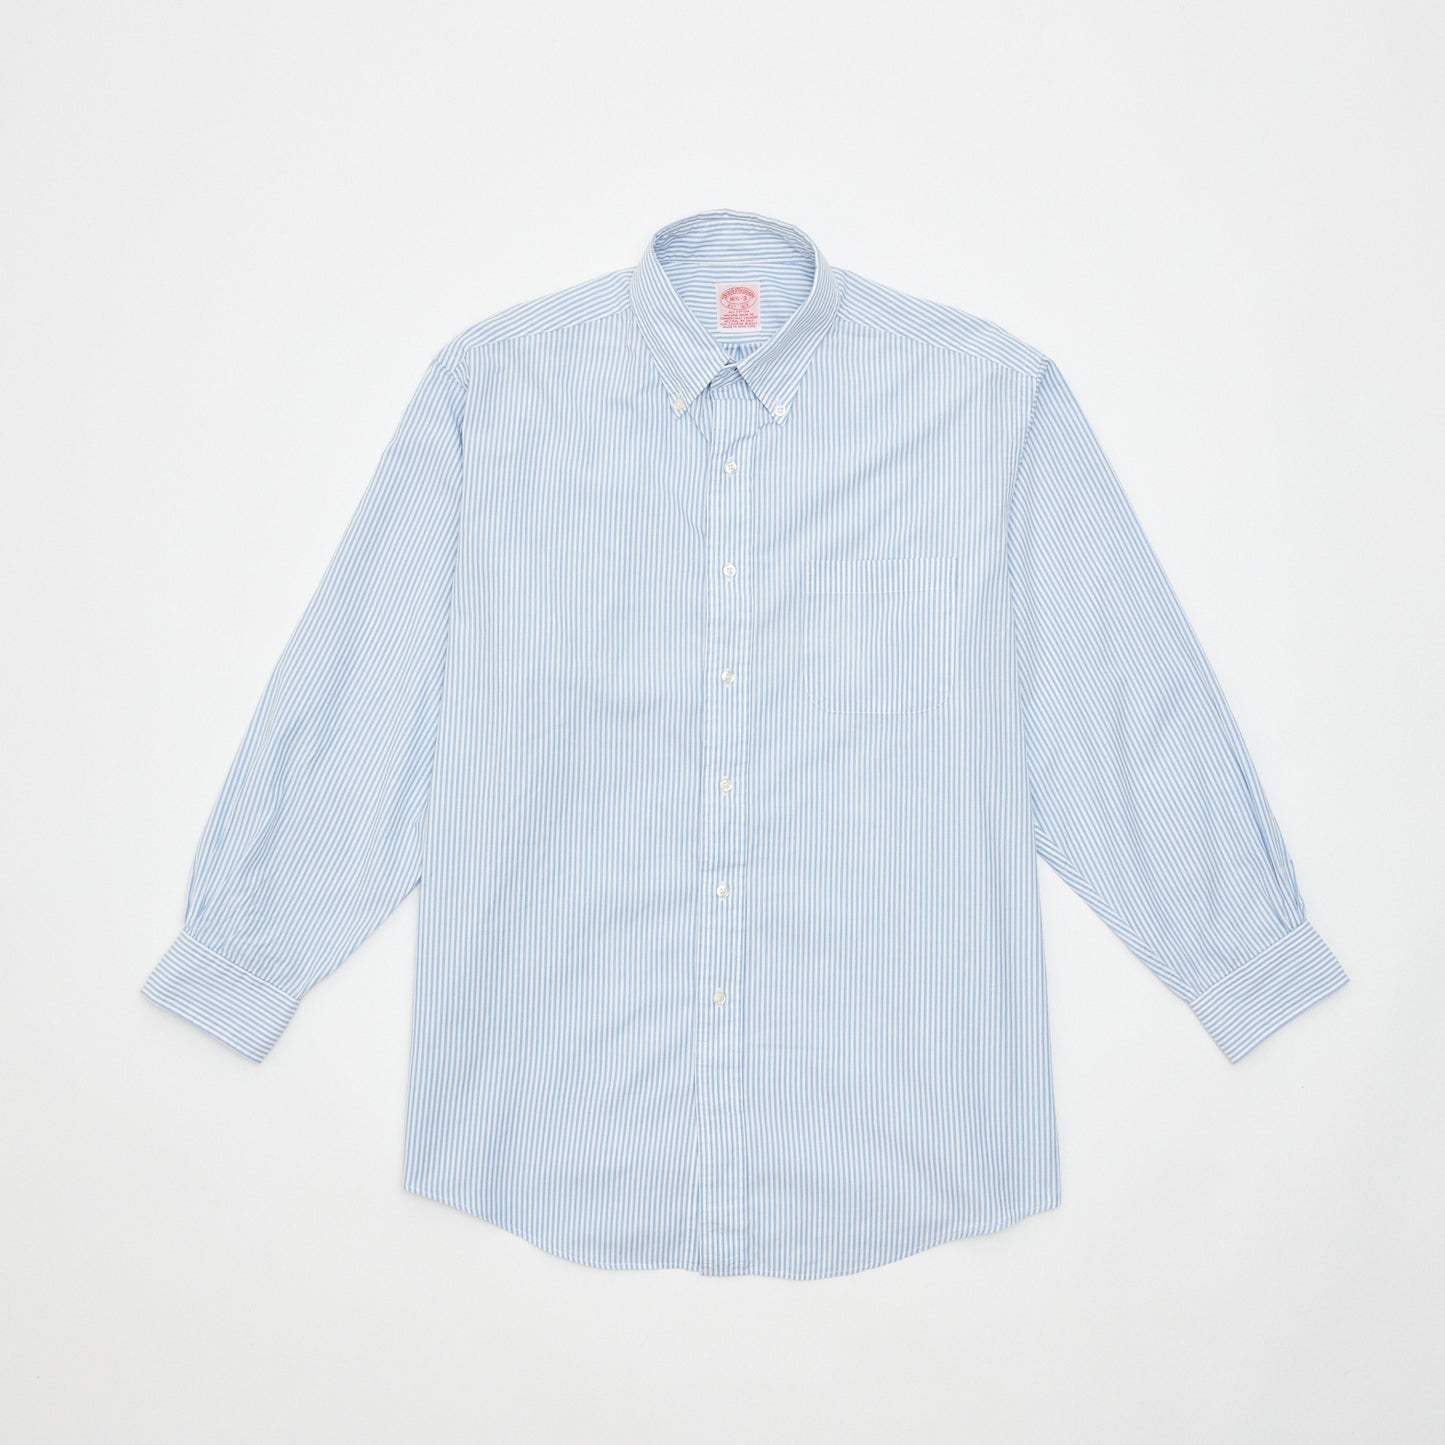 Brooks Brothers banker stripe button down